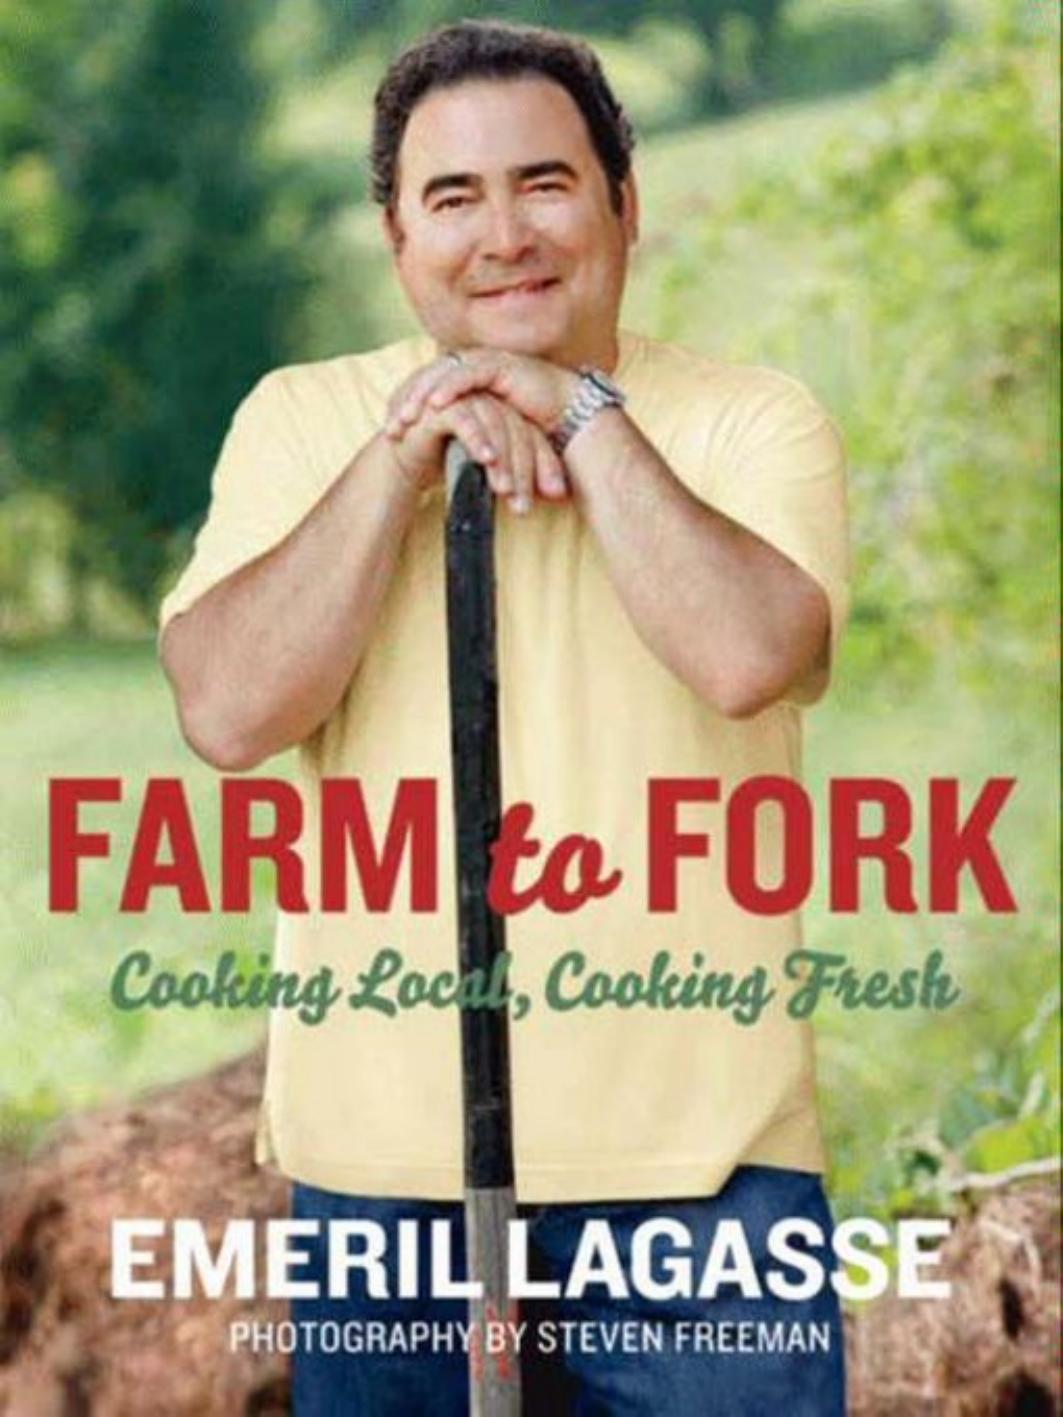 Farm to Fork: Cooking Local, Cooking Fresh by Emeril Lagasse